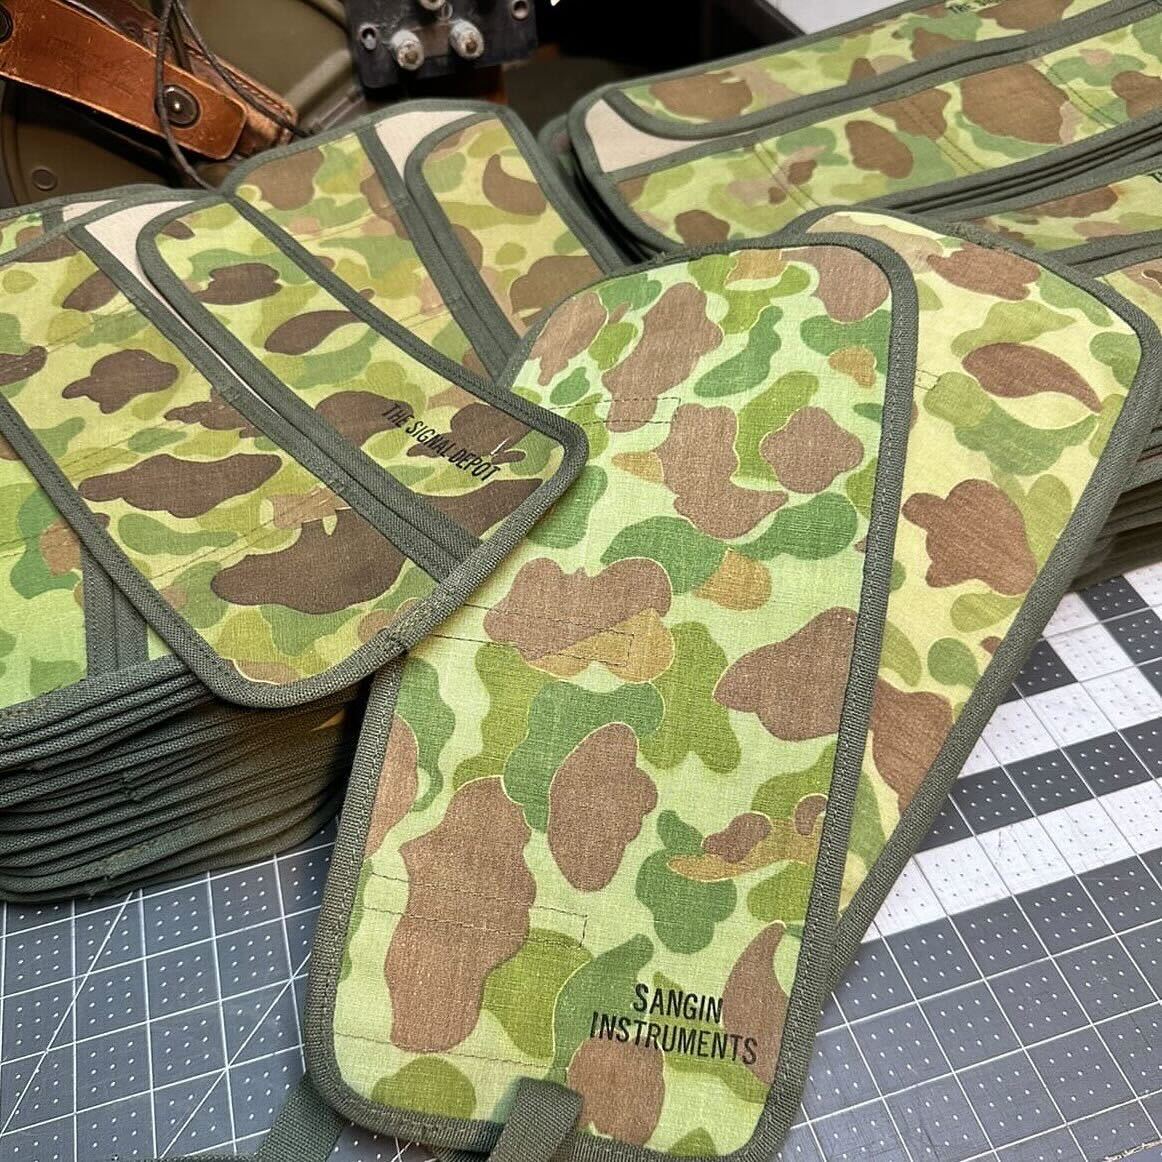 Currently in production, World War II Frog Skin camouflage shelter halves crafted into watch rolls. Safeguarding your watches with a touch of historical significance.